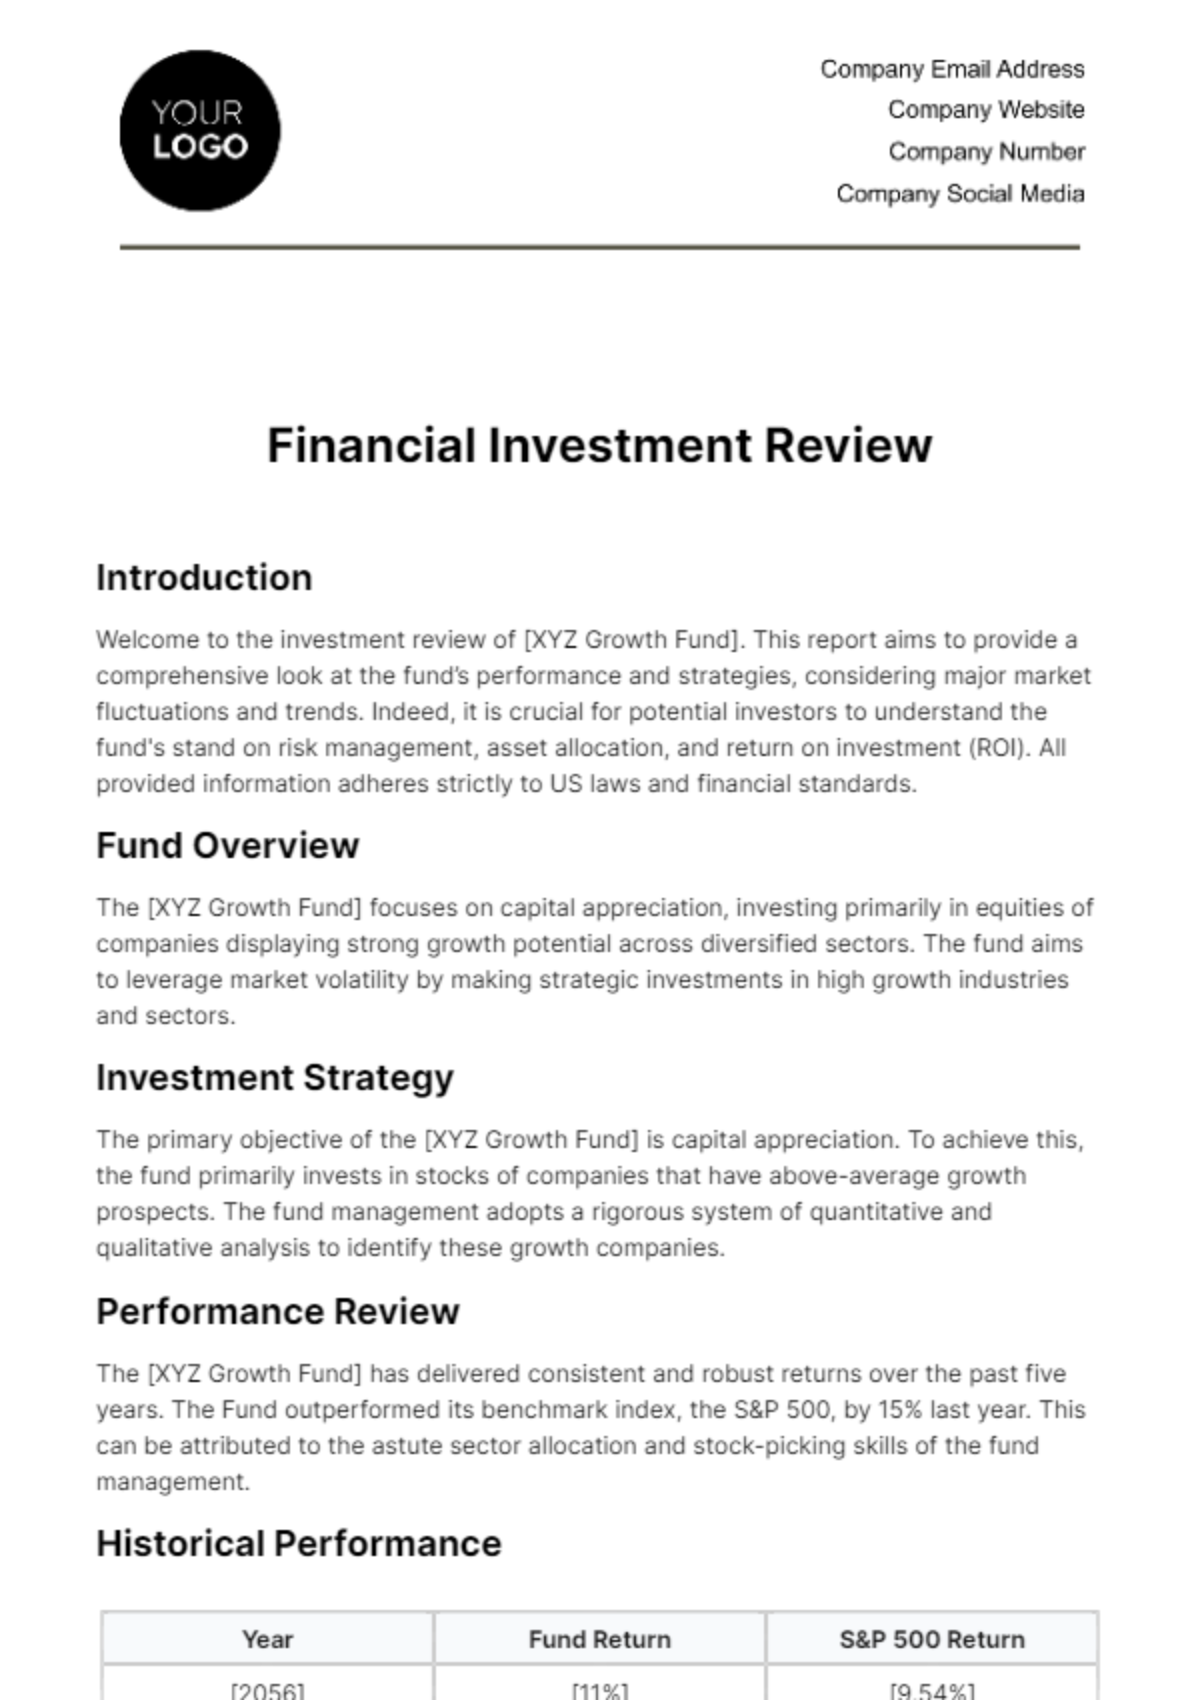 Free Financial Investment Review Template